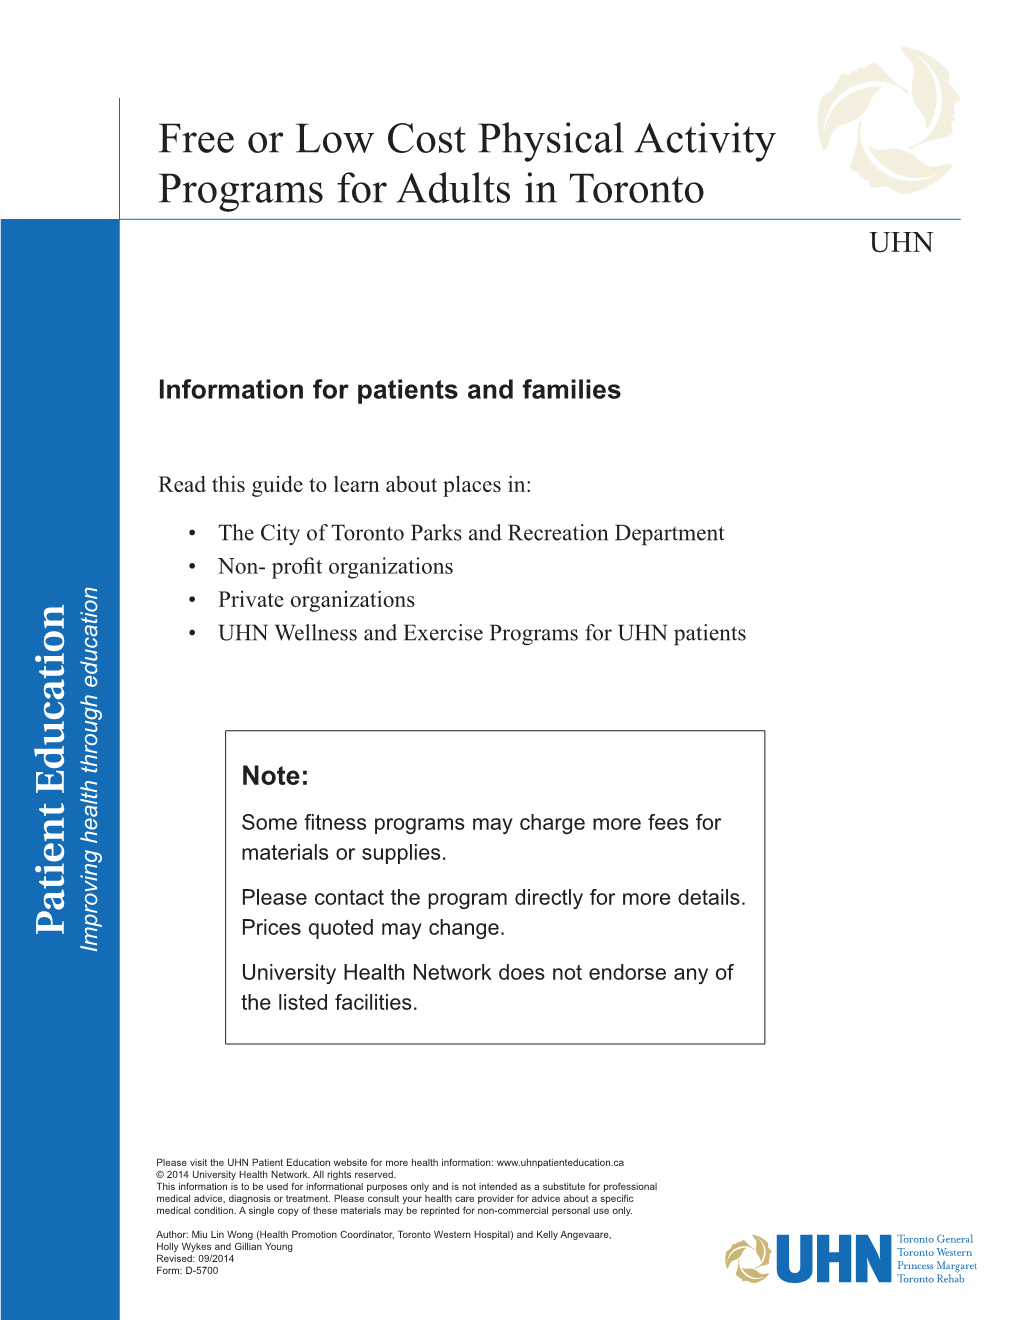 Free Or Low Cost Physical Activity Programs for Adults in Toronto UHN